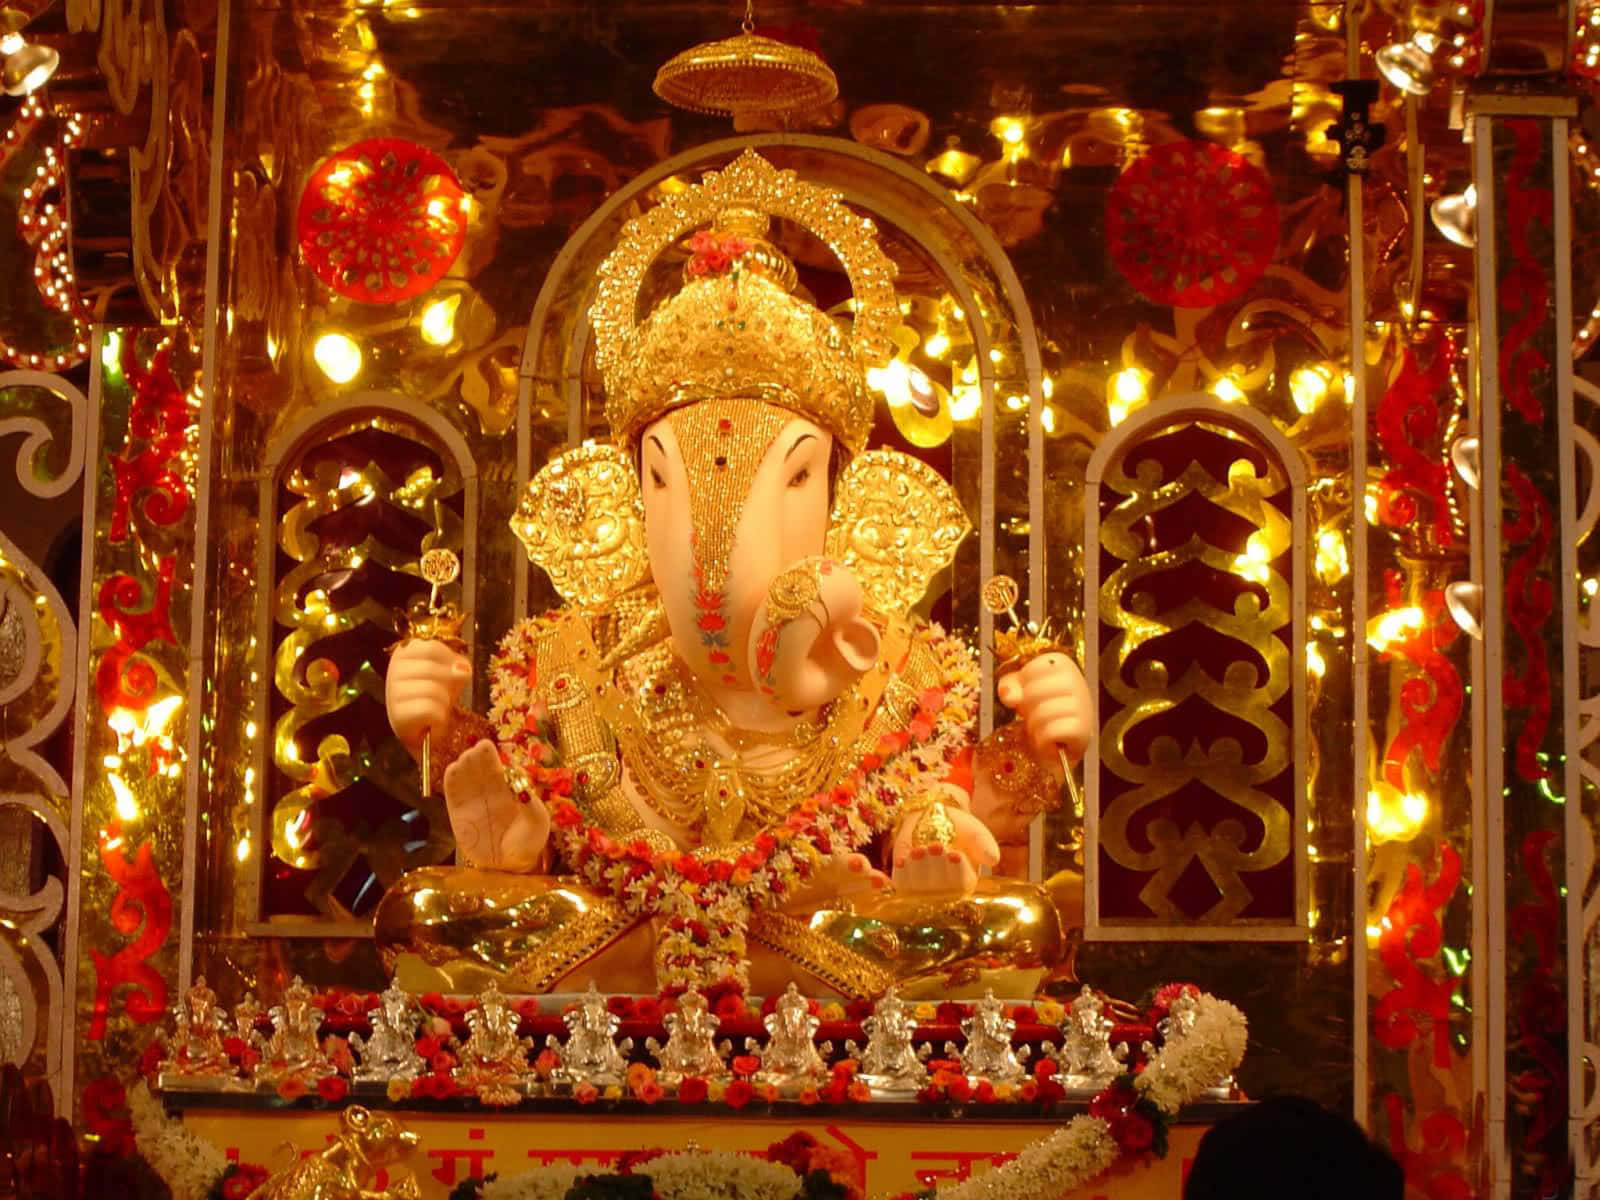 Ganesh Idol In A Temple With Lights